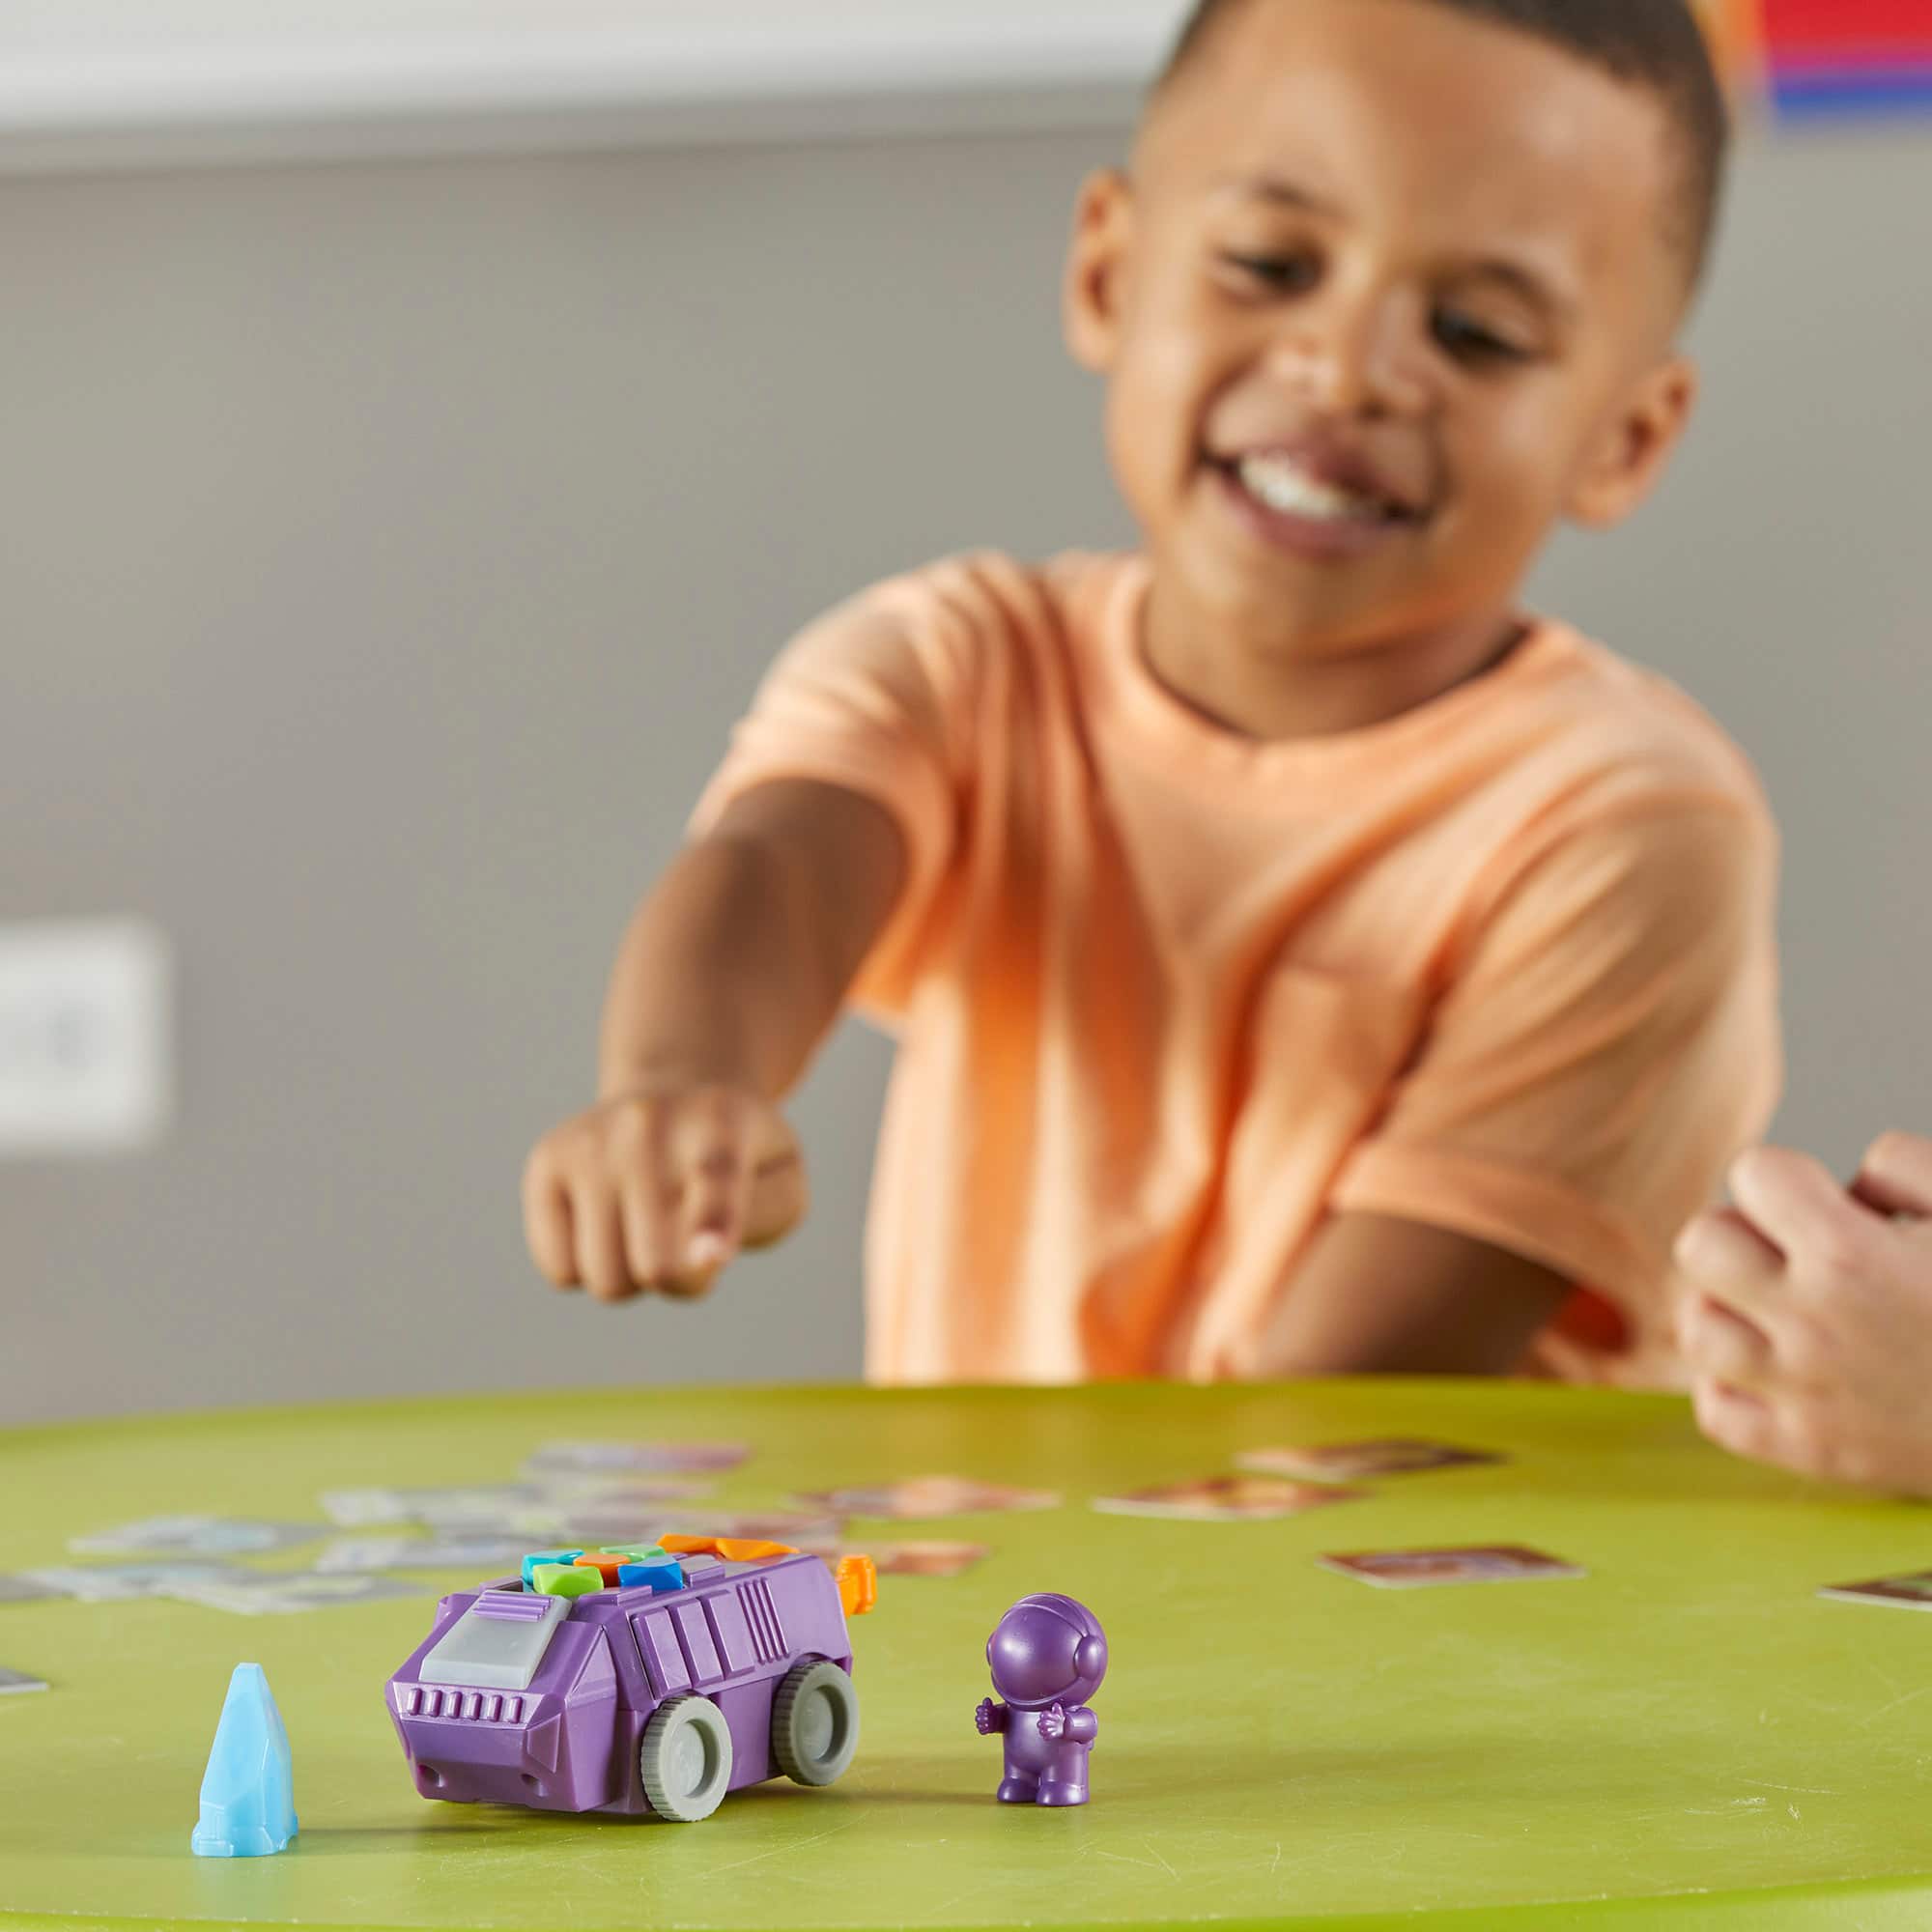 Learning Resources Space Rover